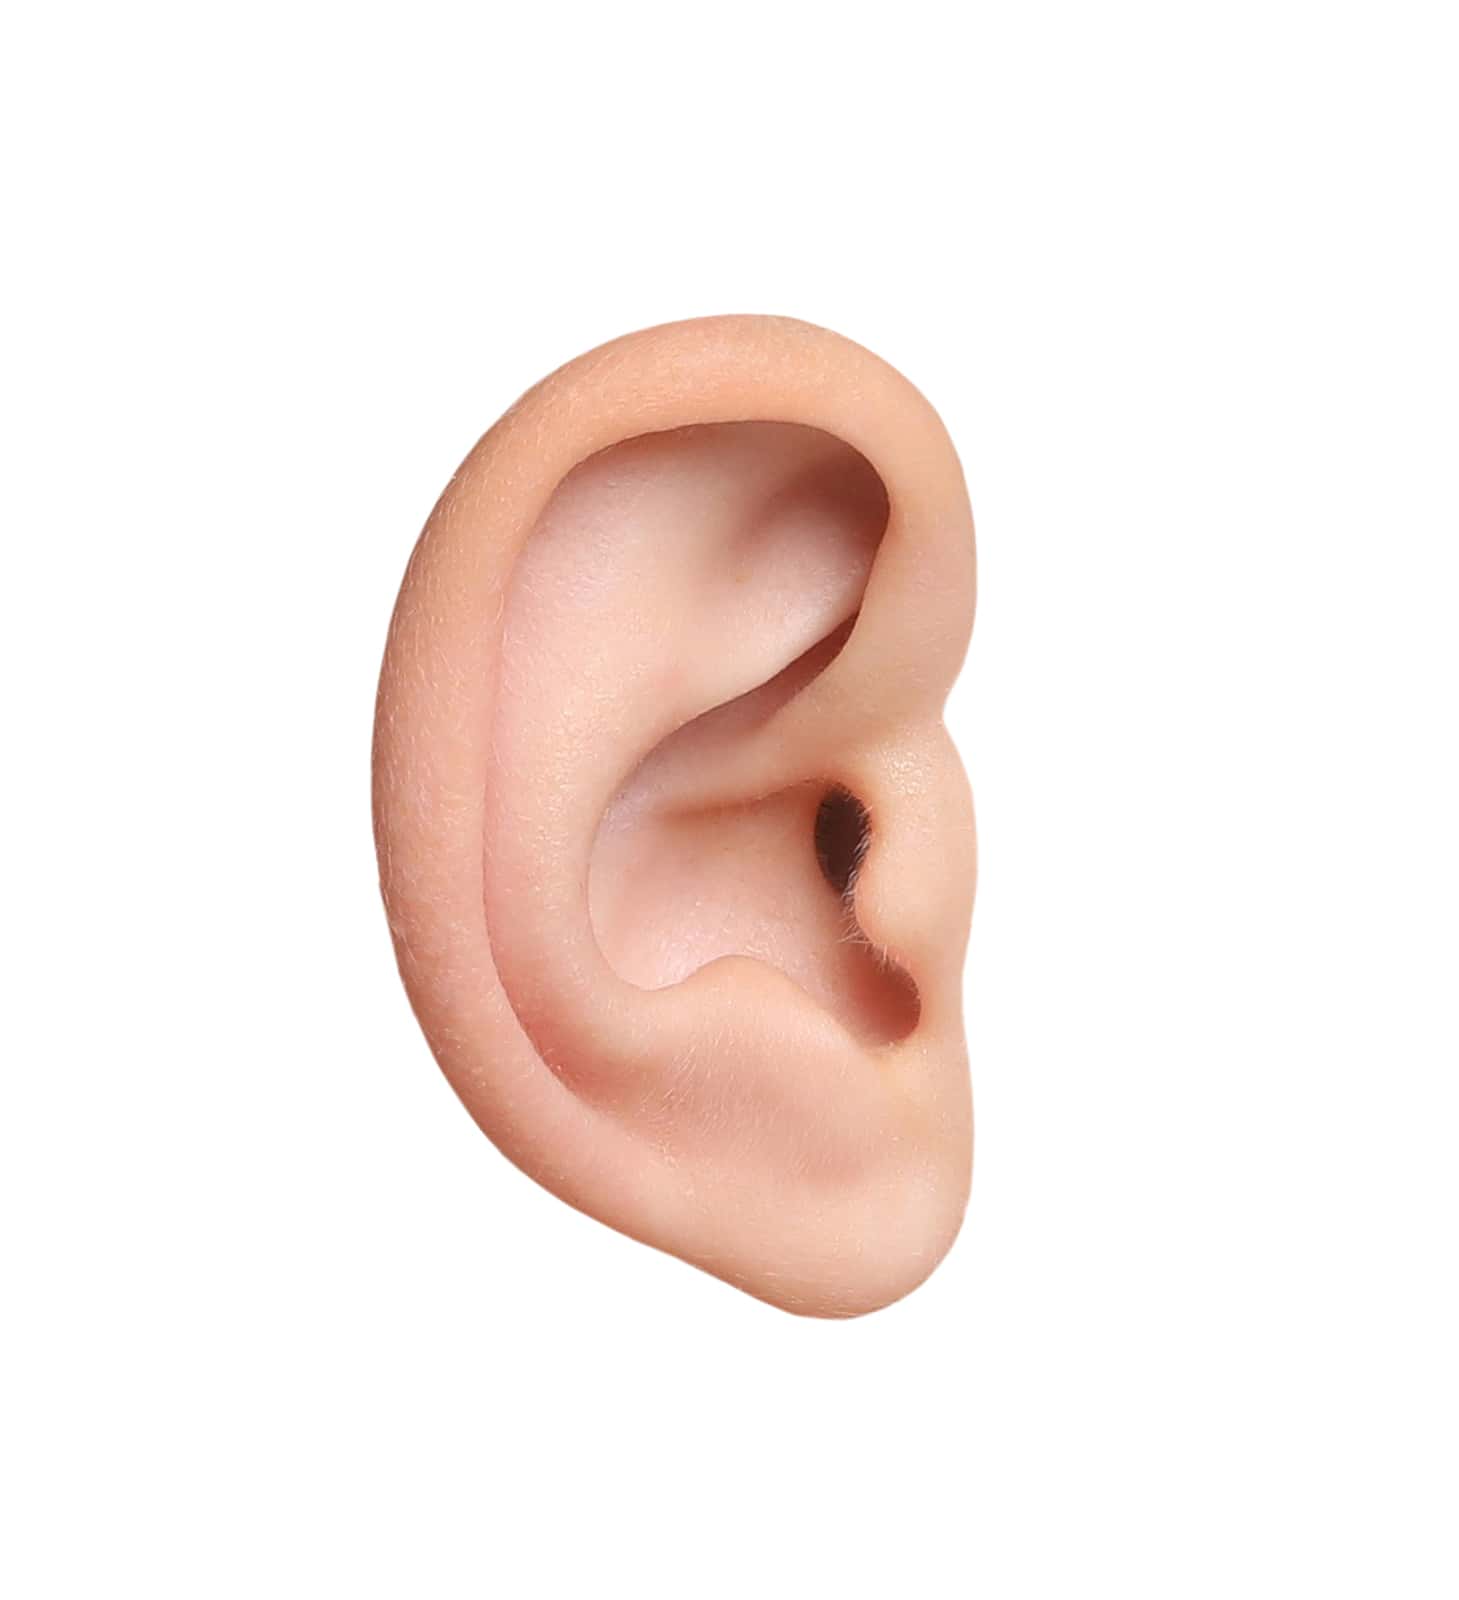 Featured image for “Tips for Cleaning Your Ears”